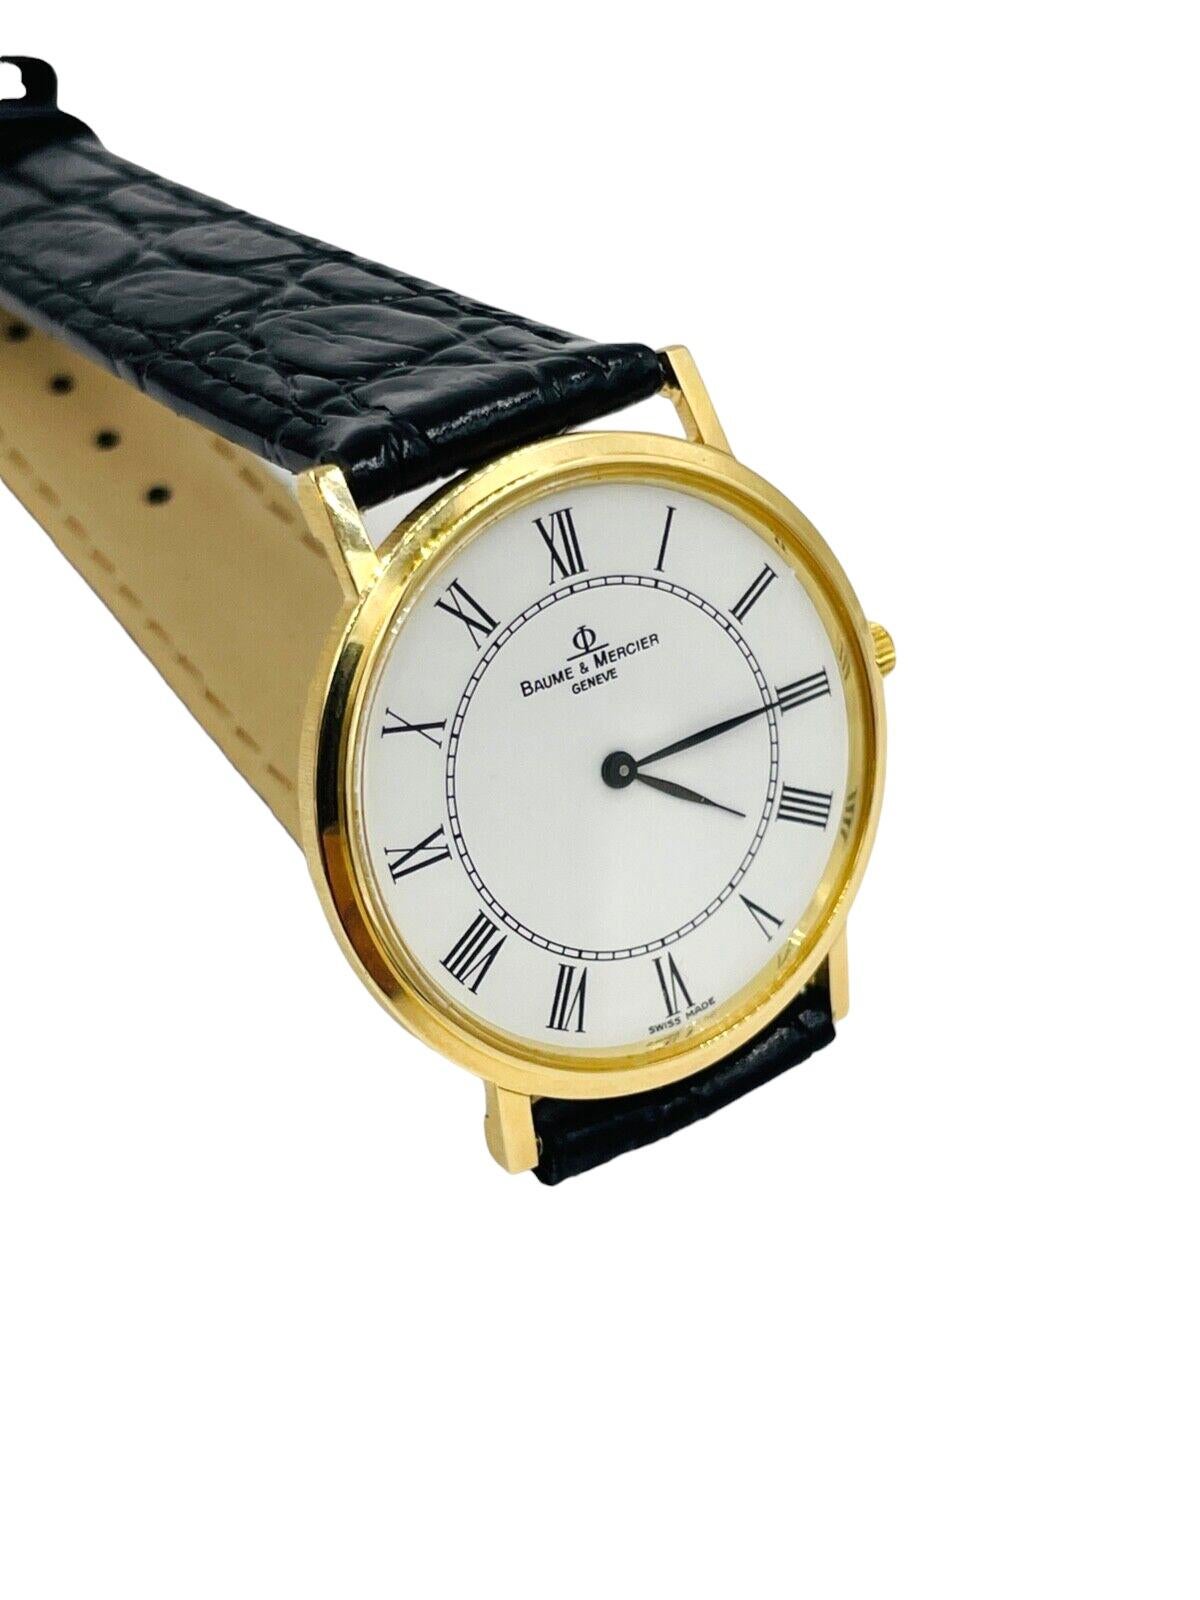 Vintage Baume Mercier Classima 18k yellow gold quartz men's watch, circa 1980s.

   This Baume & Mercier Quartz Yellow Gold Wristwatch is a true testament to the timeless elegance and craftsmanship that the brand has become synonymous with.  Crafted